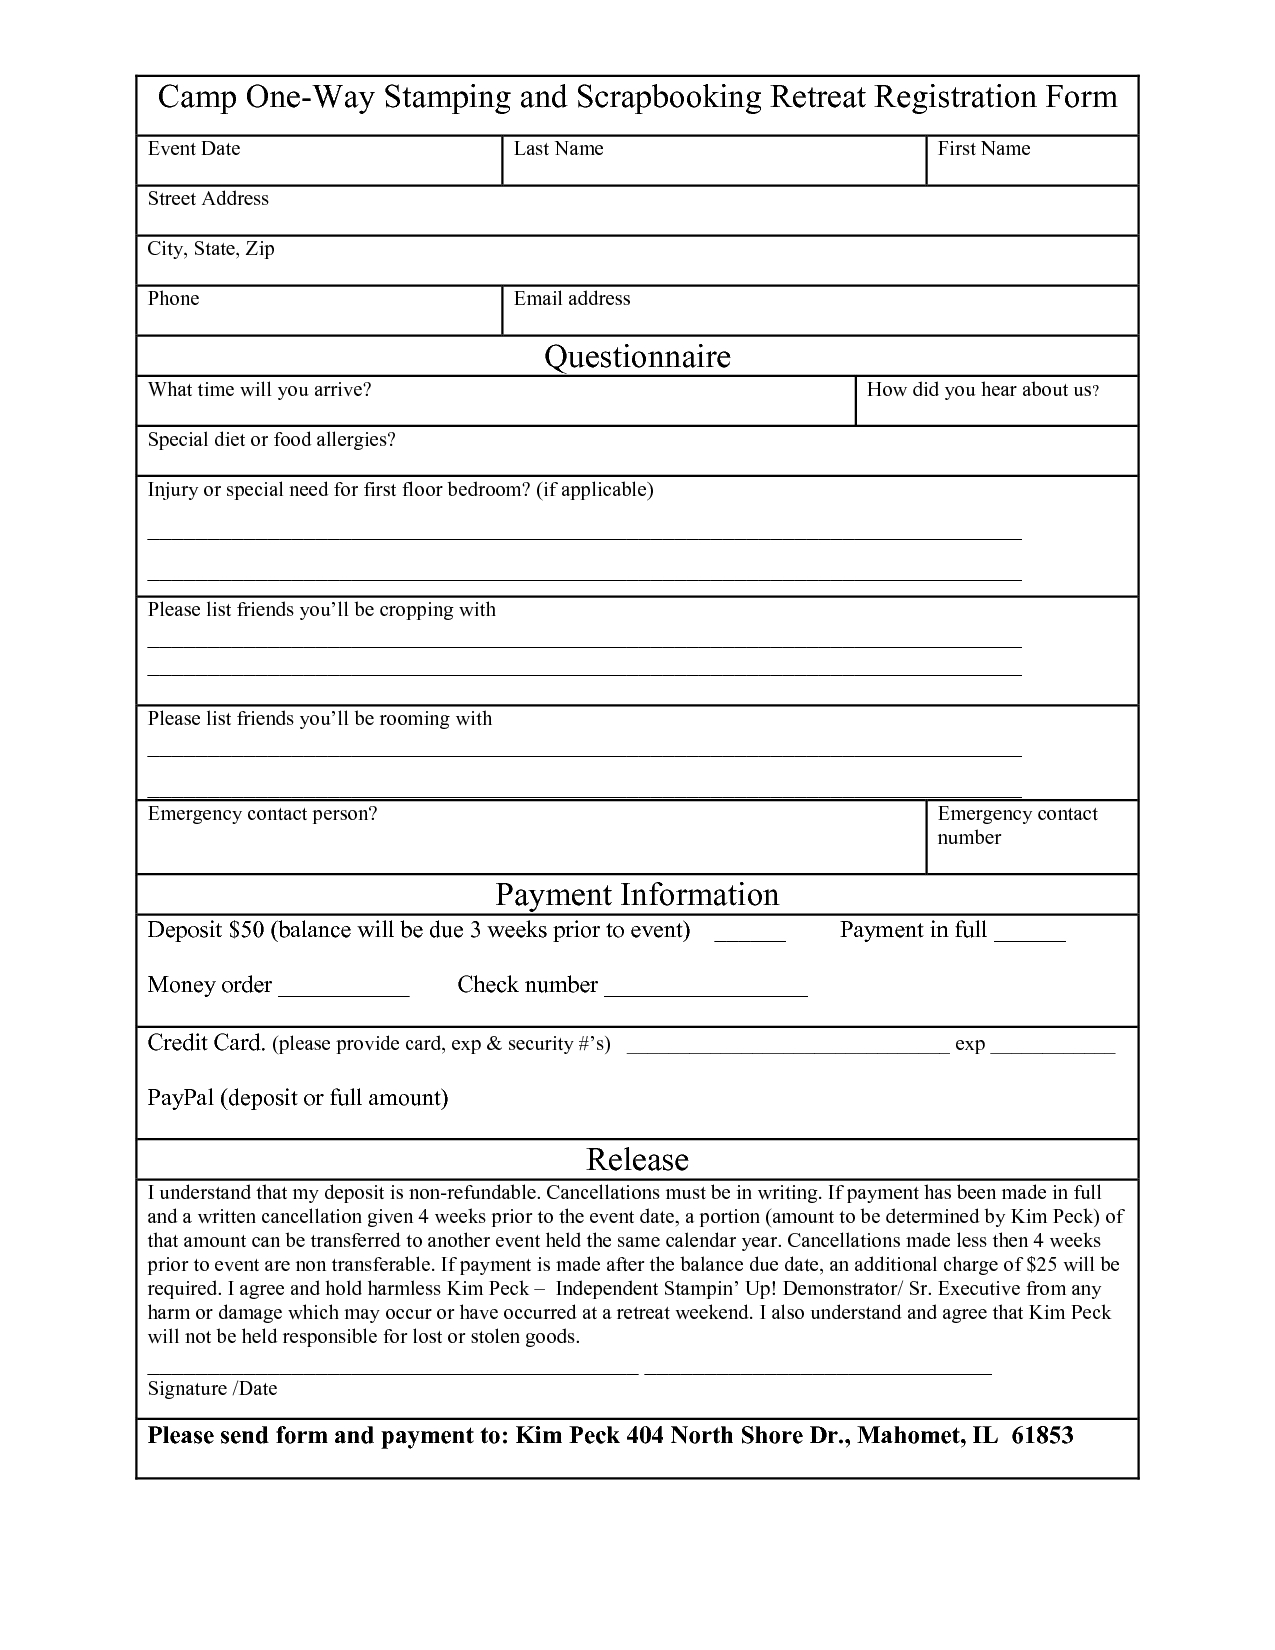 Free Registration Form Template Word Want A Free Refresher In Registration Form Template Word Free